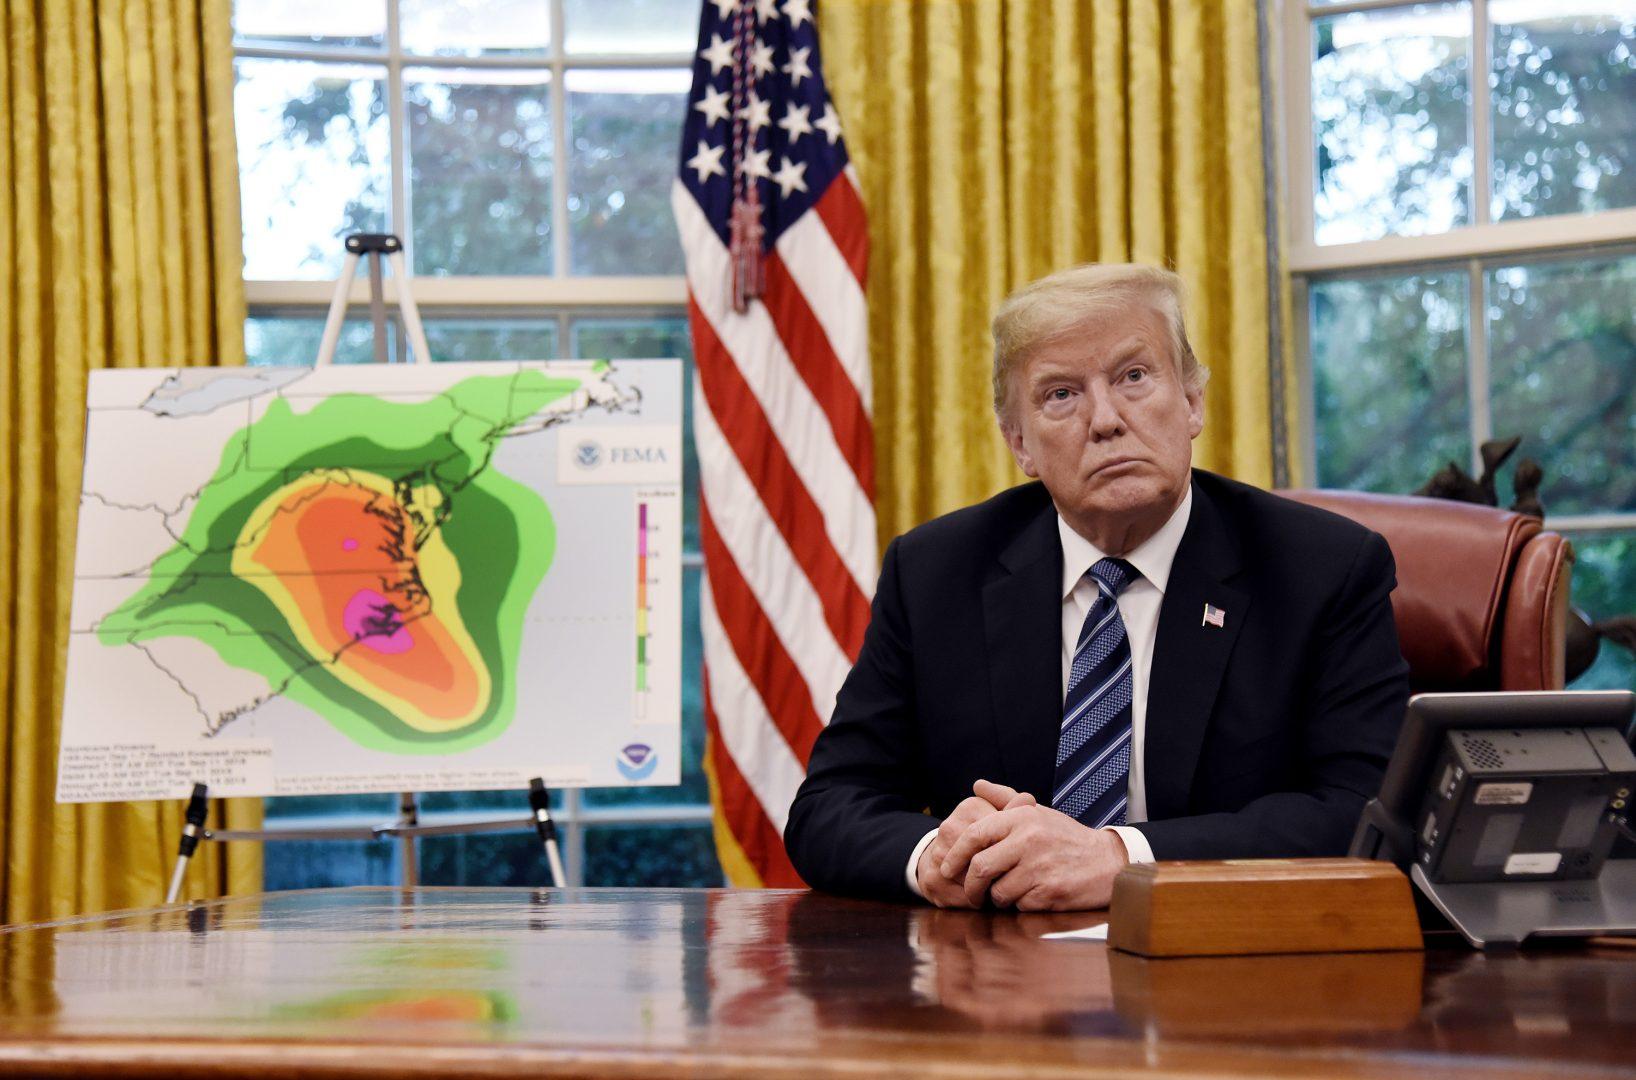 U.S. President Donald Trump speaks during a briefing on the looming threat of Hurricane Florence with the Secretary of the Department of Homeland Security and the Administrator of the Federal Emergency Management Agency in the Oval Office of the White House, Sept. 11, 2018 in Washington, D.C. (Olivier Douliery/Abaca Press/TNS)